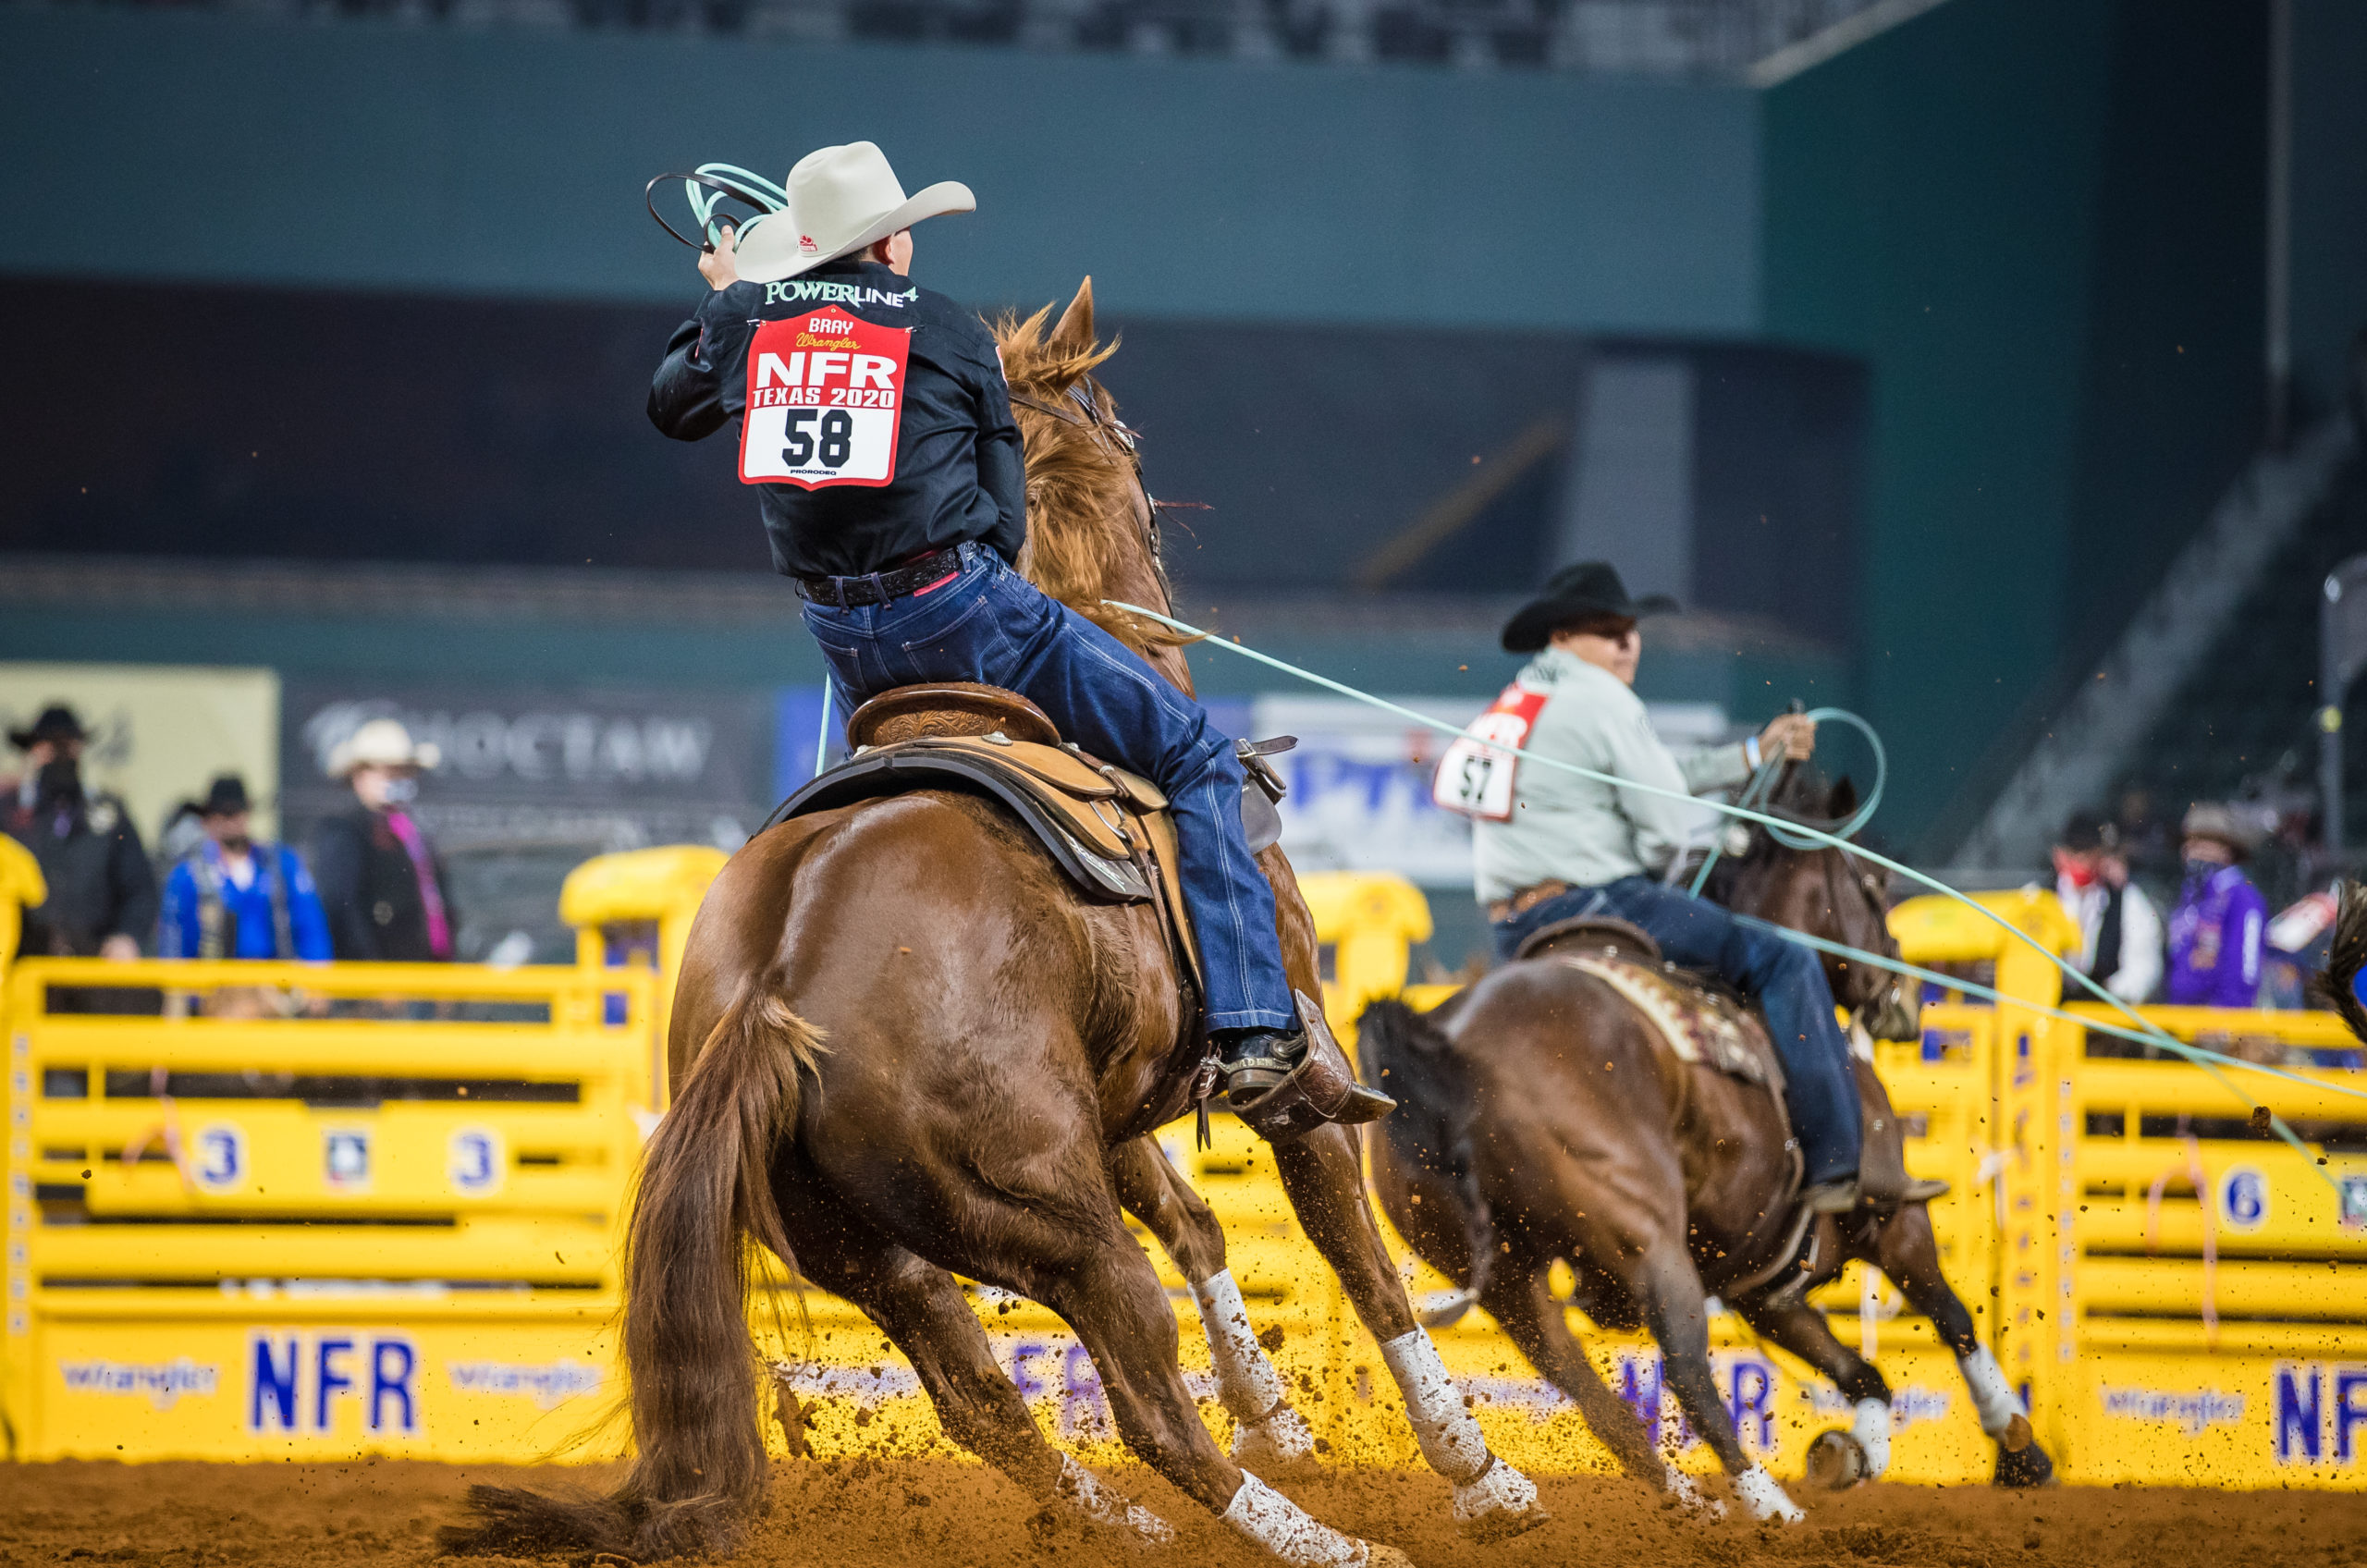 2020 NFR Round 1 Team Ropers Erich Rogers and Paden Bray Take the Win